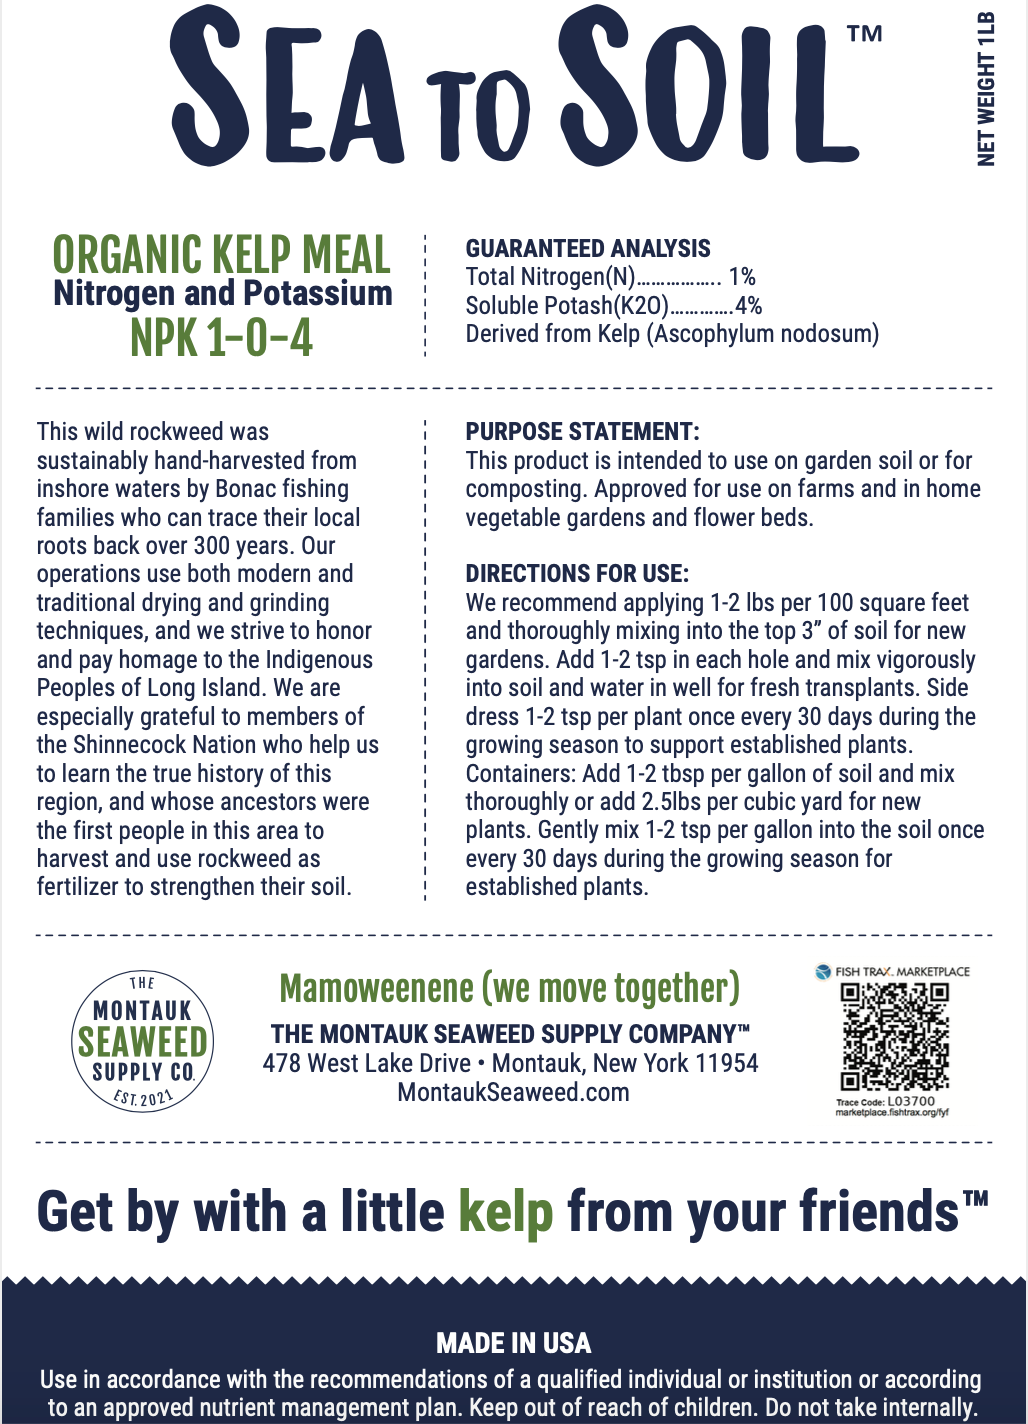 Back label of Sea to Soil Organic Kelp Meal. Includes guaranteed analysis, purpose statement, and directions for use. 